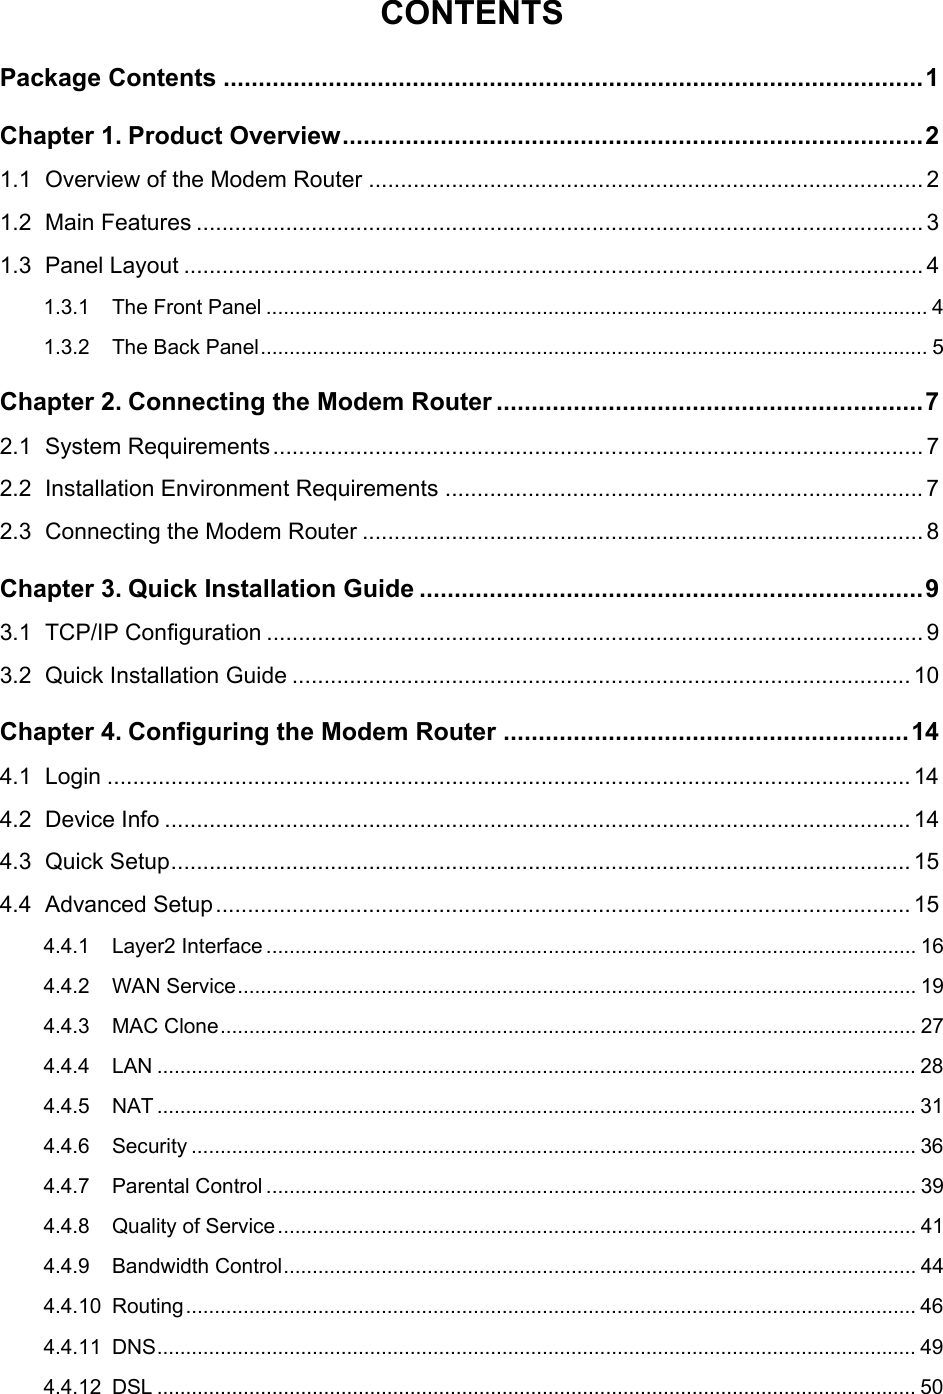  CONTENTS Package Contents ....................................................................................................1 Chapter 1. Product Overview...................................................................................2 1.1 Overview of the Modem Router ....................................................................................... 2 1.2 Main Features .................................................................................................................. 3 1.3 Panel Layout .................................................................................................................... 4 1.3.1 The Front Panel ................................................................................................................... 4 1.3.2 The Back Panel.................................................................................................................... 5 Chapter 2. Connecting the Modem Router .............................................................7 2.1 System Requirements...................................................................................................... 7 2.2 Installation Environment Requirements ........................................................................... 7 2.3 Connecting the Modem Router ........................................................................................ 8 Chapter 3. Quick Installation Guide ........................................................................9 3.1 TCP/IP Configuration ....................................................................................................... 9 3.2 Quick Installation Guide ................................................................................................. 10 Chapter 4. Configuring the Modem Router ..........................................................14 4.1 Login .............................................................................................................................. 14 4.2 Device Info ..................................................................................................................... 14 4.3 Quick Setup.................................................................................................................... 15 4.4 Advanced Setup............................................................................................................. 15 4.4.1 Layer2 Interface ................................................................................................................. 16 4.4.2 WAN Service...................................................................................................................... 19 4.4.3 MAC Clone......................................................................................................................... 27 4.4.4 LAN .................................................................................................................................... 28 4.4.5 NAT .................................................................................................................................... 31 4.4.6 Security .............................................................................................................................. 36 4.4.7 Parental Control ................................................................................................................. 39 4.4.8 Quality of Service............................................................................................................... 41 4.4.9 Bandwidth Control.............................................................................................................. 44 4.4.10 Routing............................................................................................................................... 46 4.4.11 DNS.................................................................................................................................... 49 4.4.12 DSL .................................................................................................................................... 50  